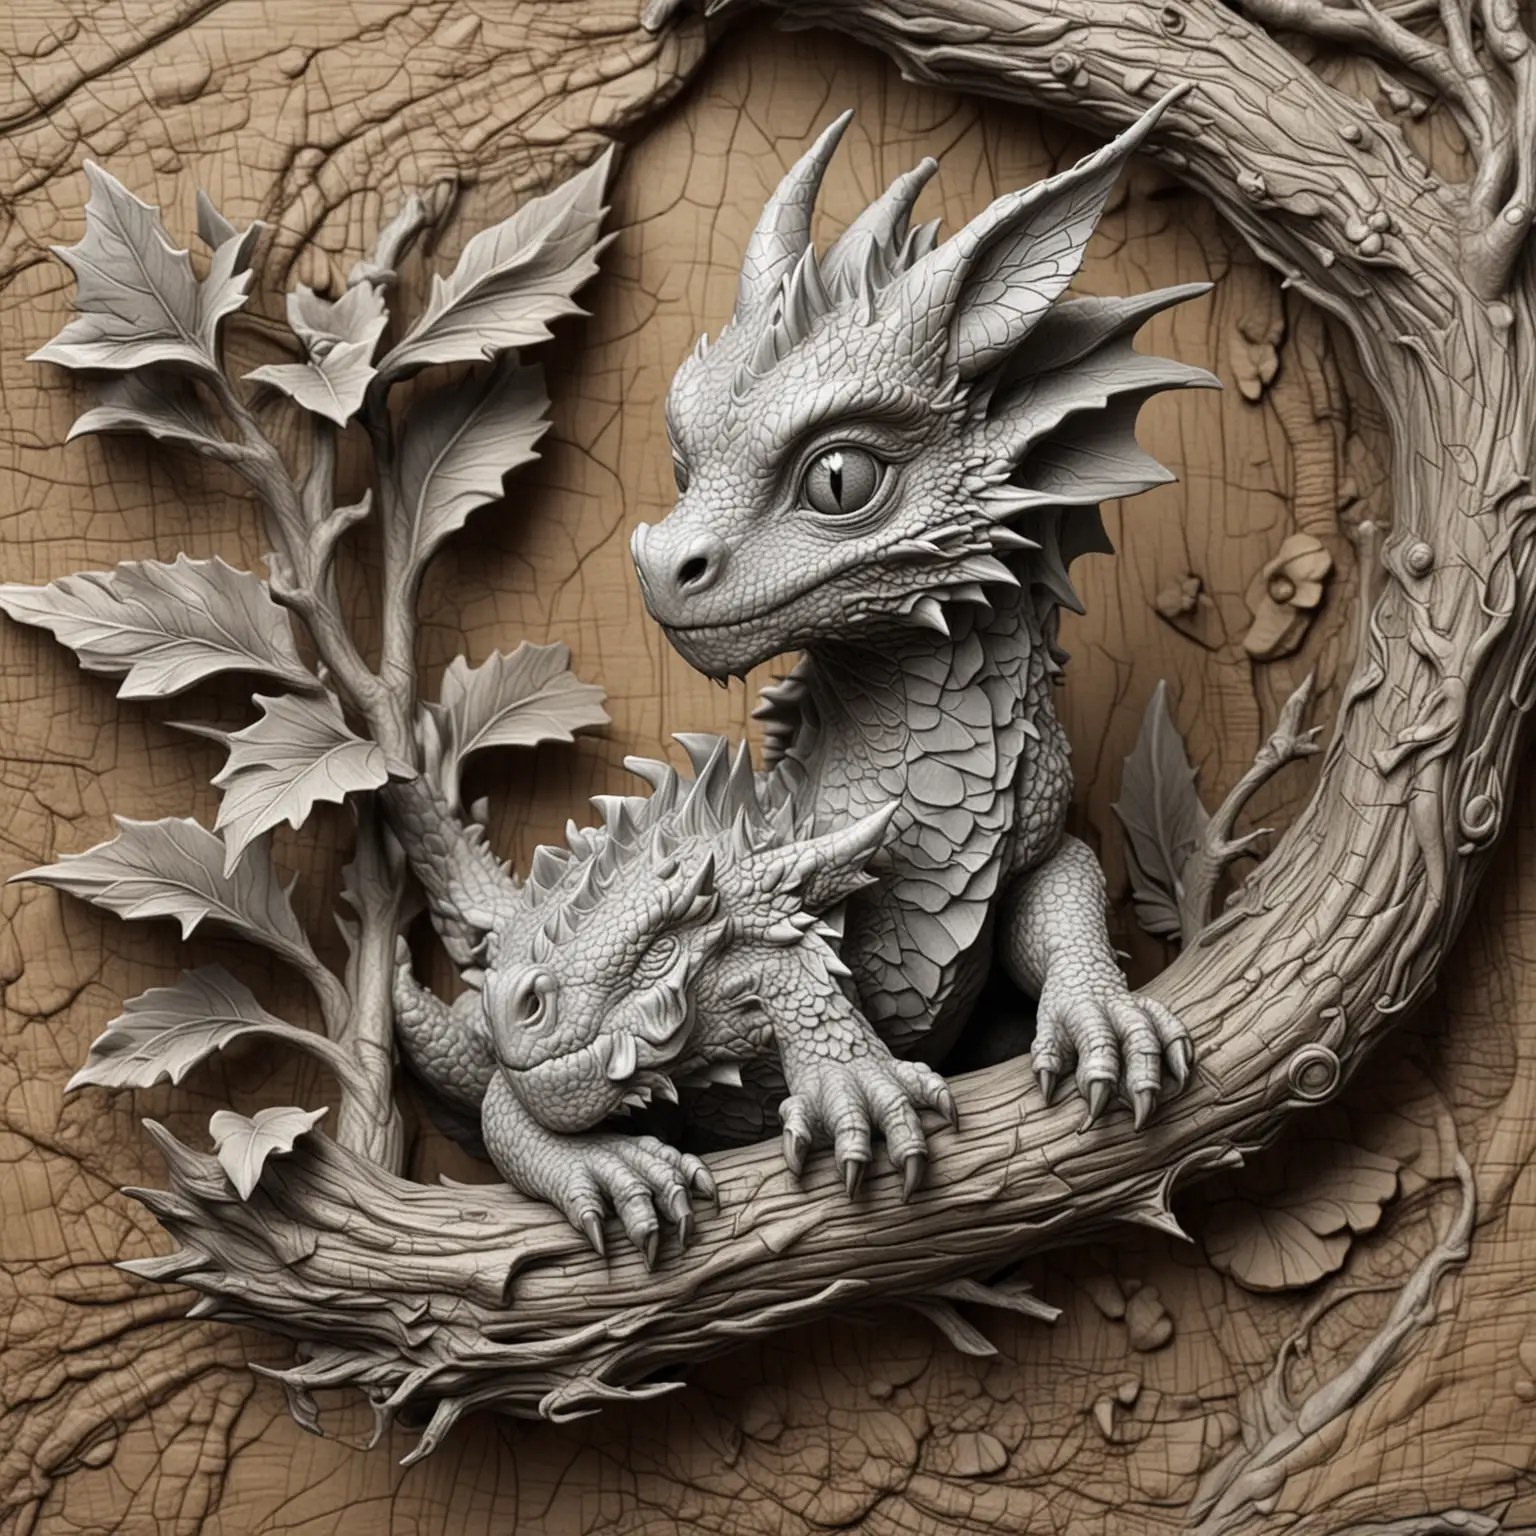 create a bas relief image of a baby dragon sitting on a branch 3d effect grayscale,  laser engraving